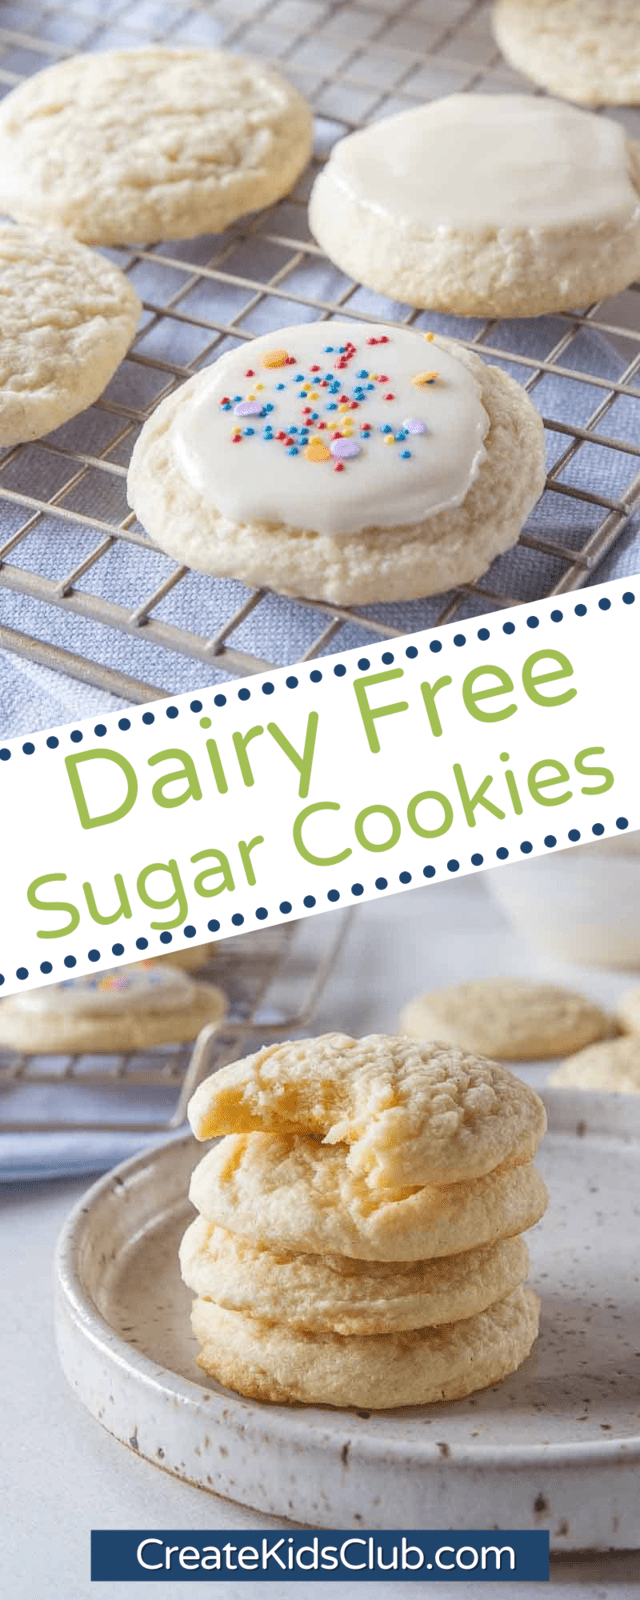 two Pinterest images of dairy free sugar cookies